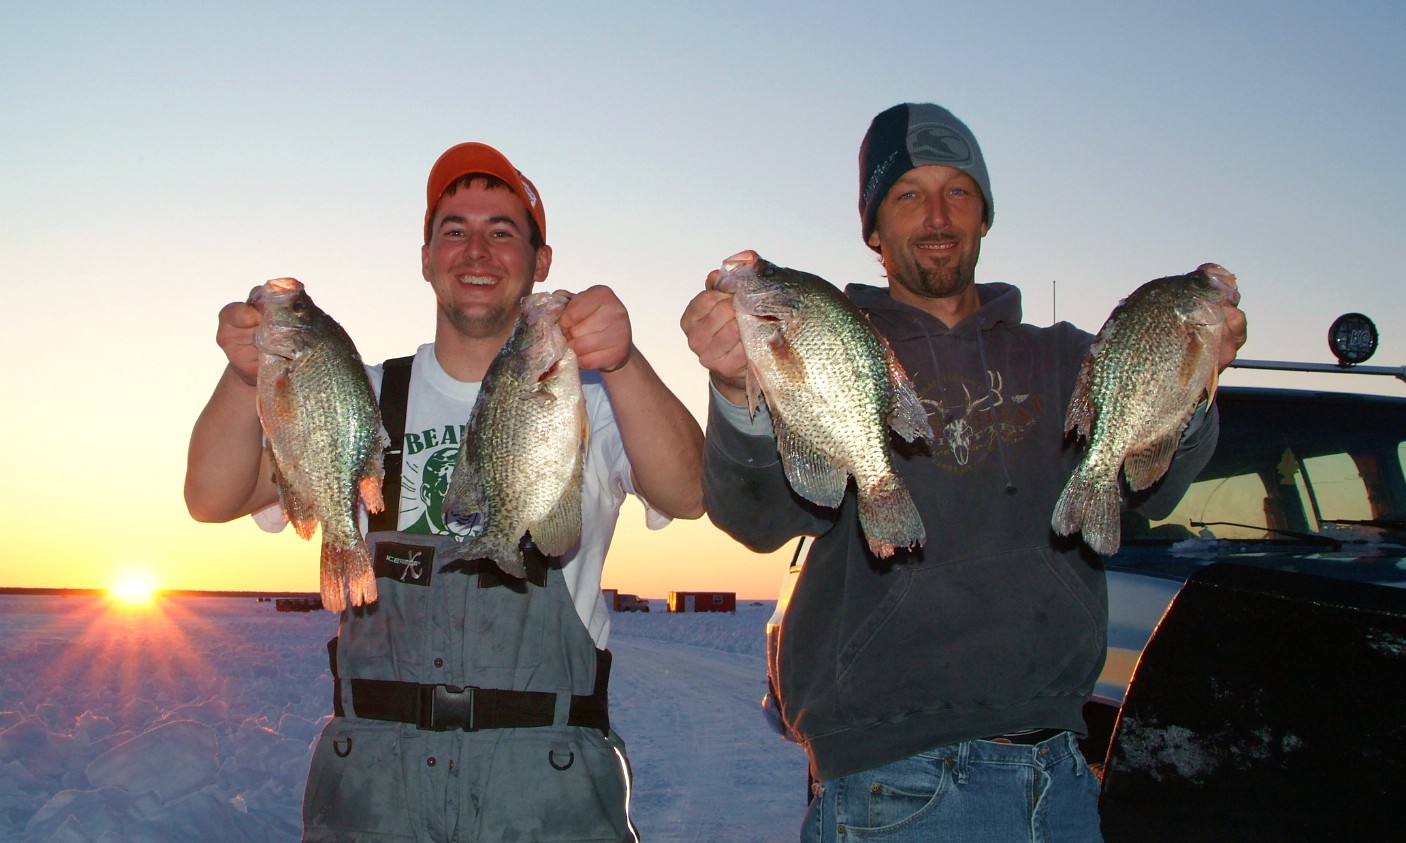 Stockton offers great winter crappie fishing